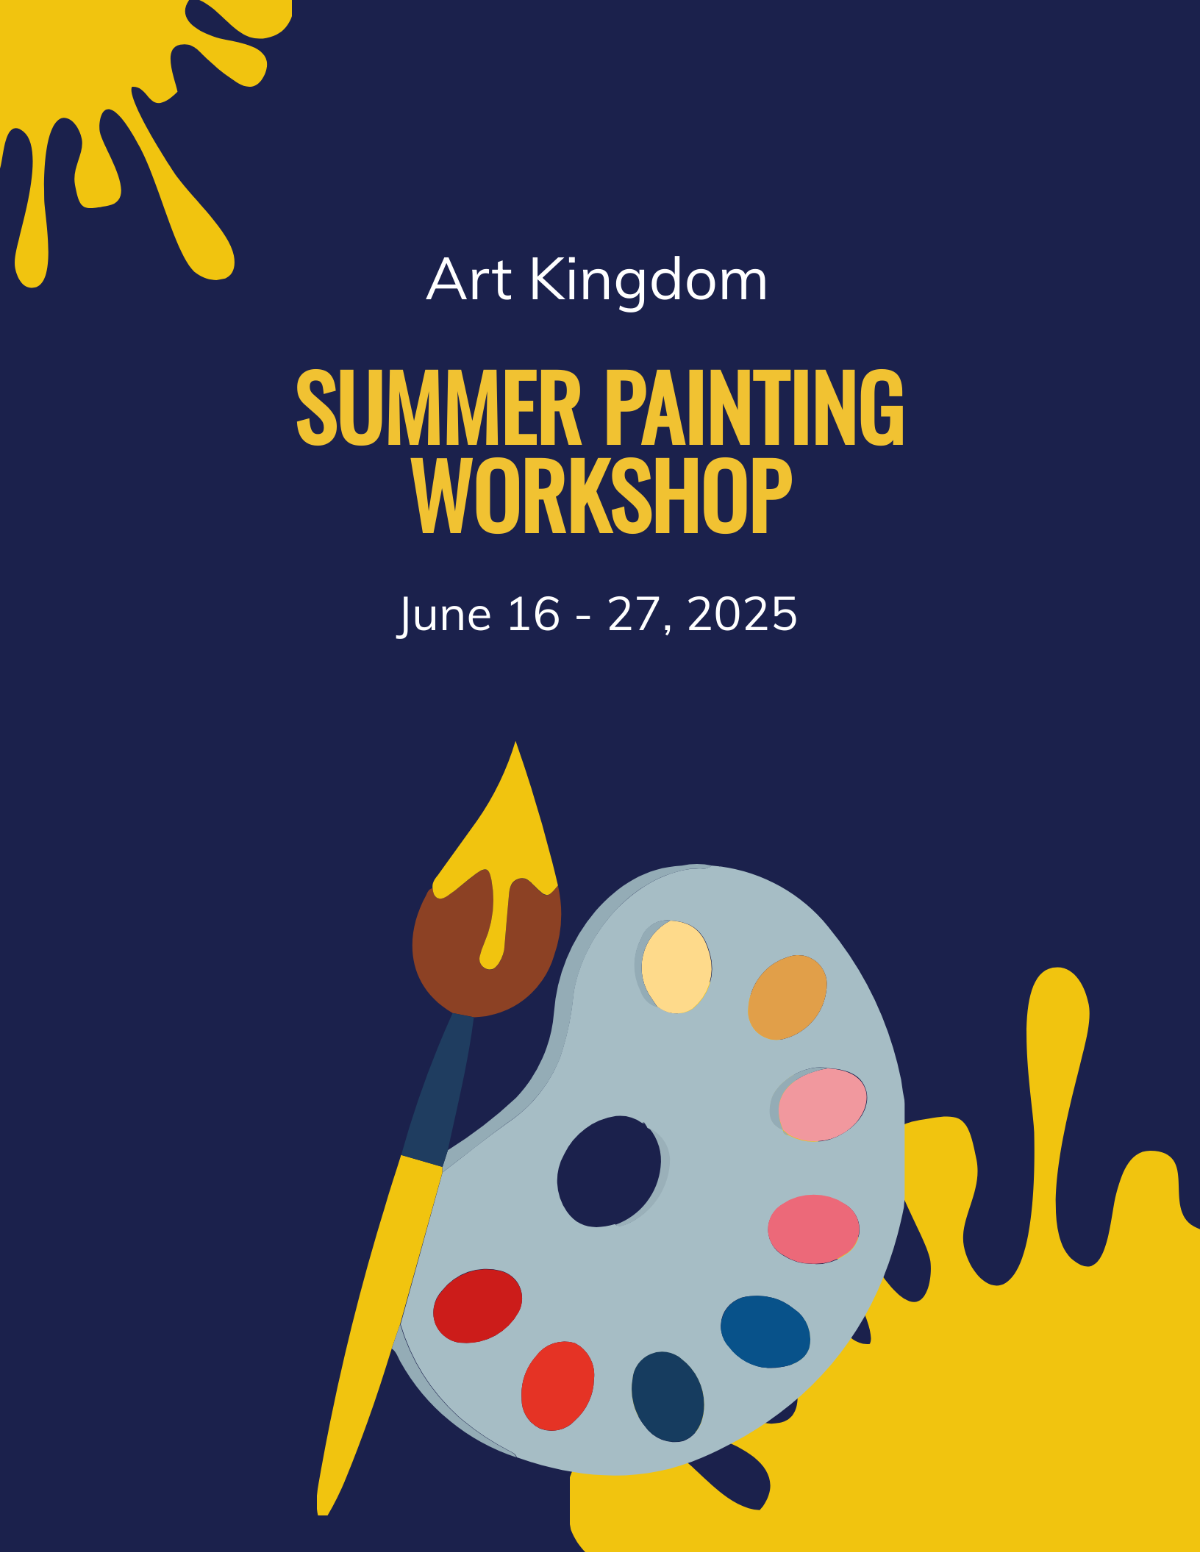 Free Painting Workshop Flyer Template